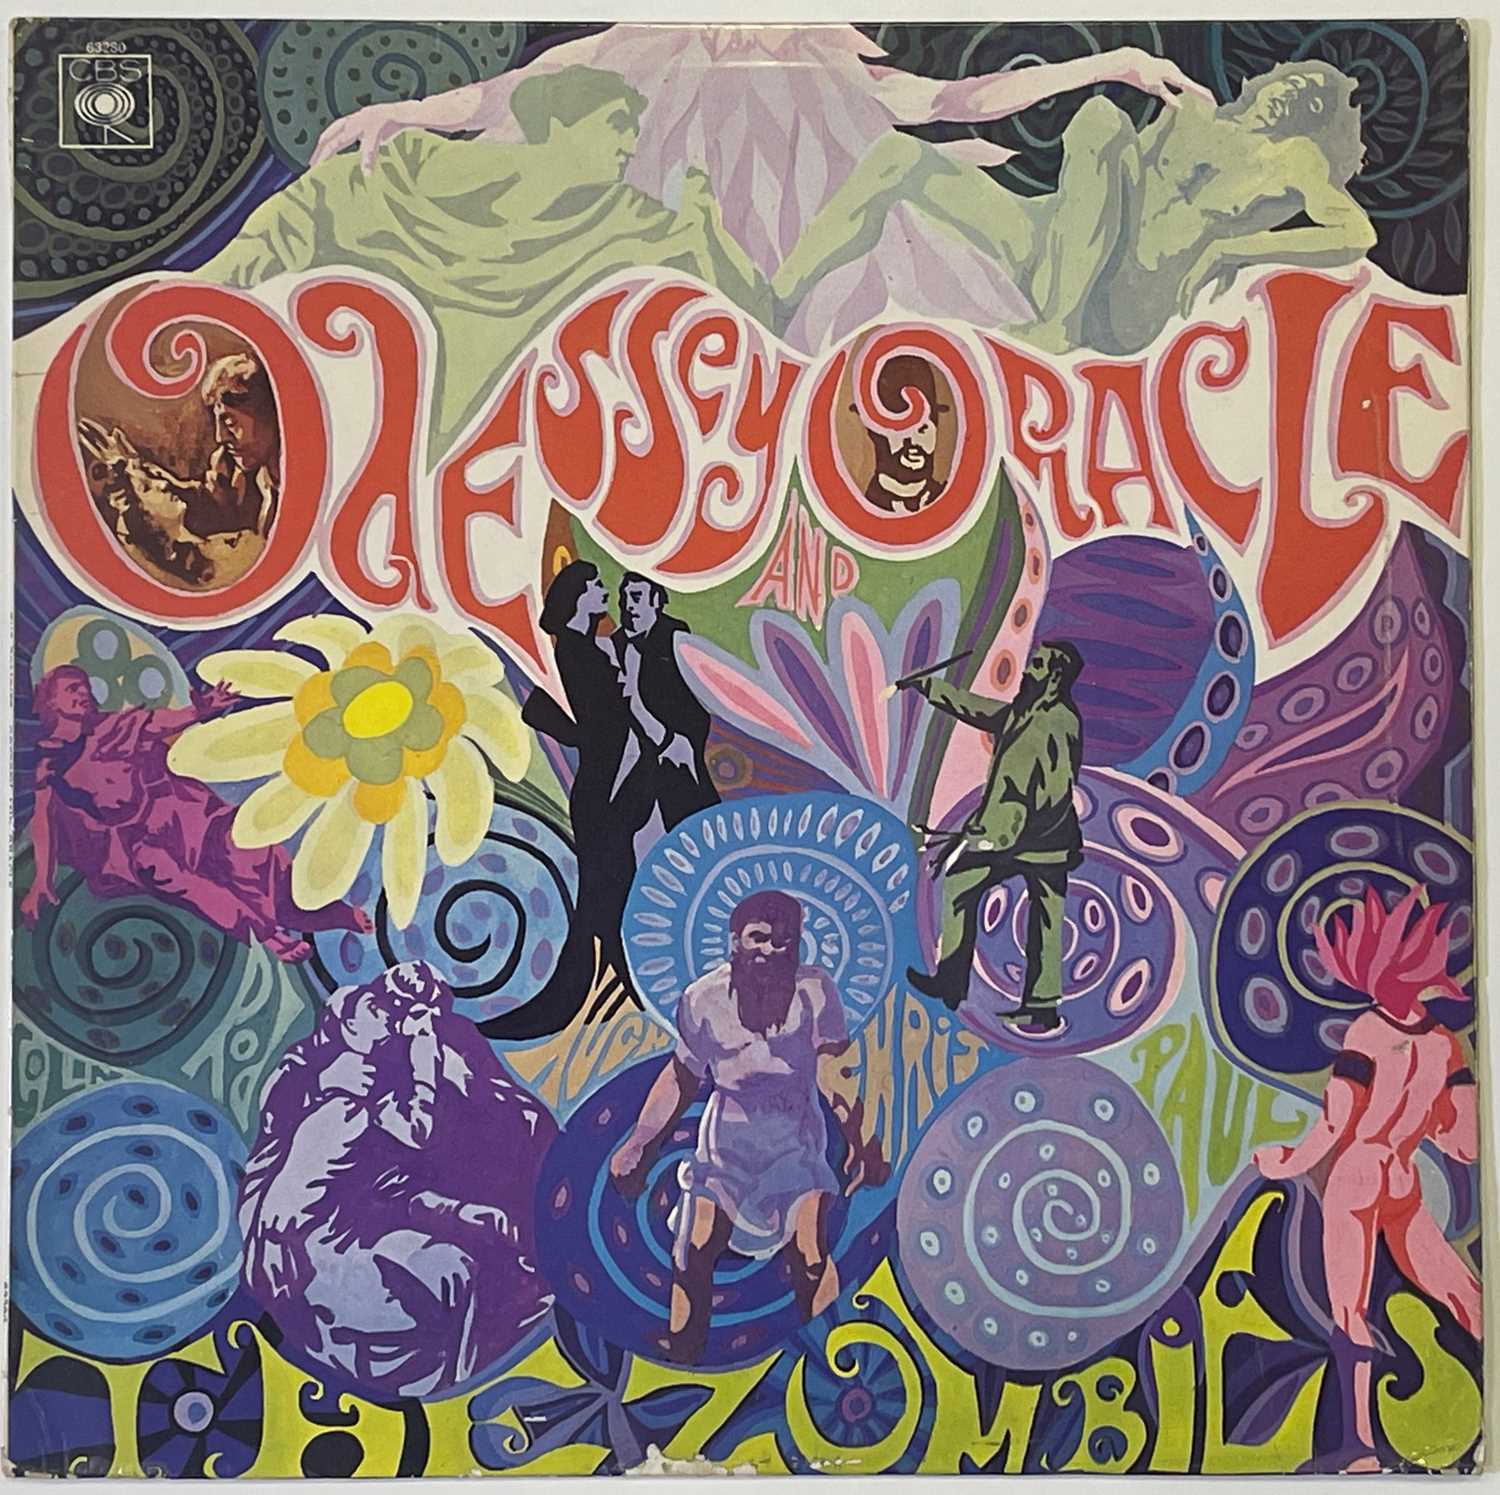 THE ZOMBIES - ODESSY AND ORACLE LP (ORIGINAL UK STEREO COPY - CBS S 63280) - Image 2 of 3